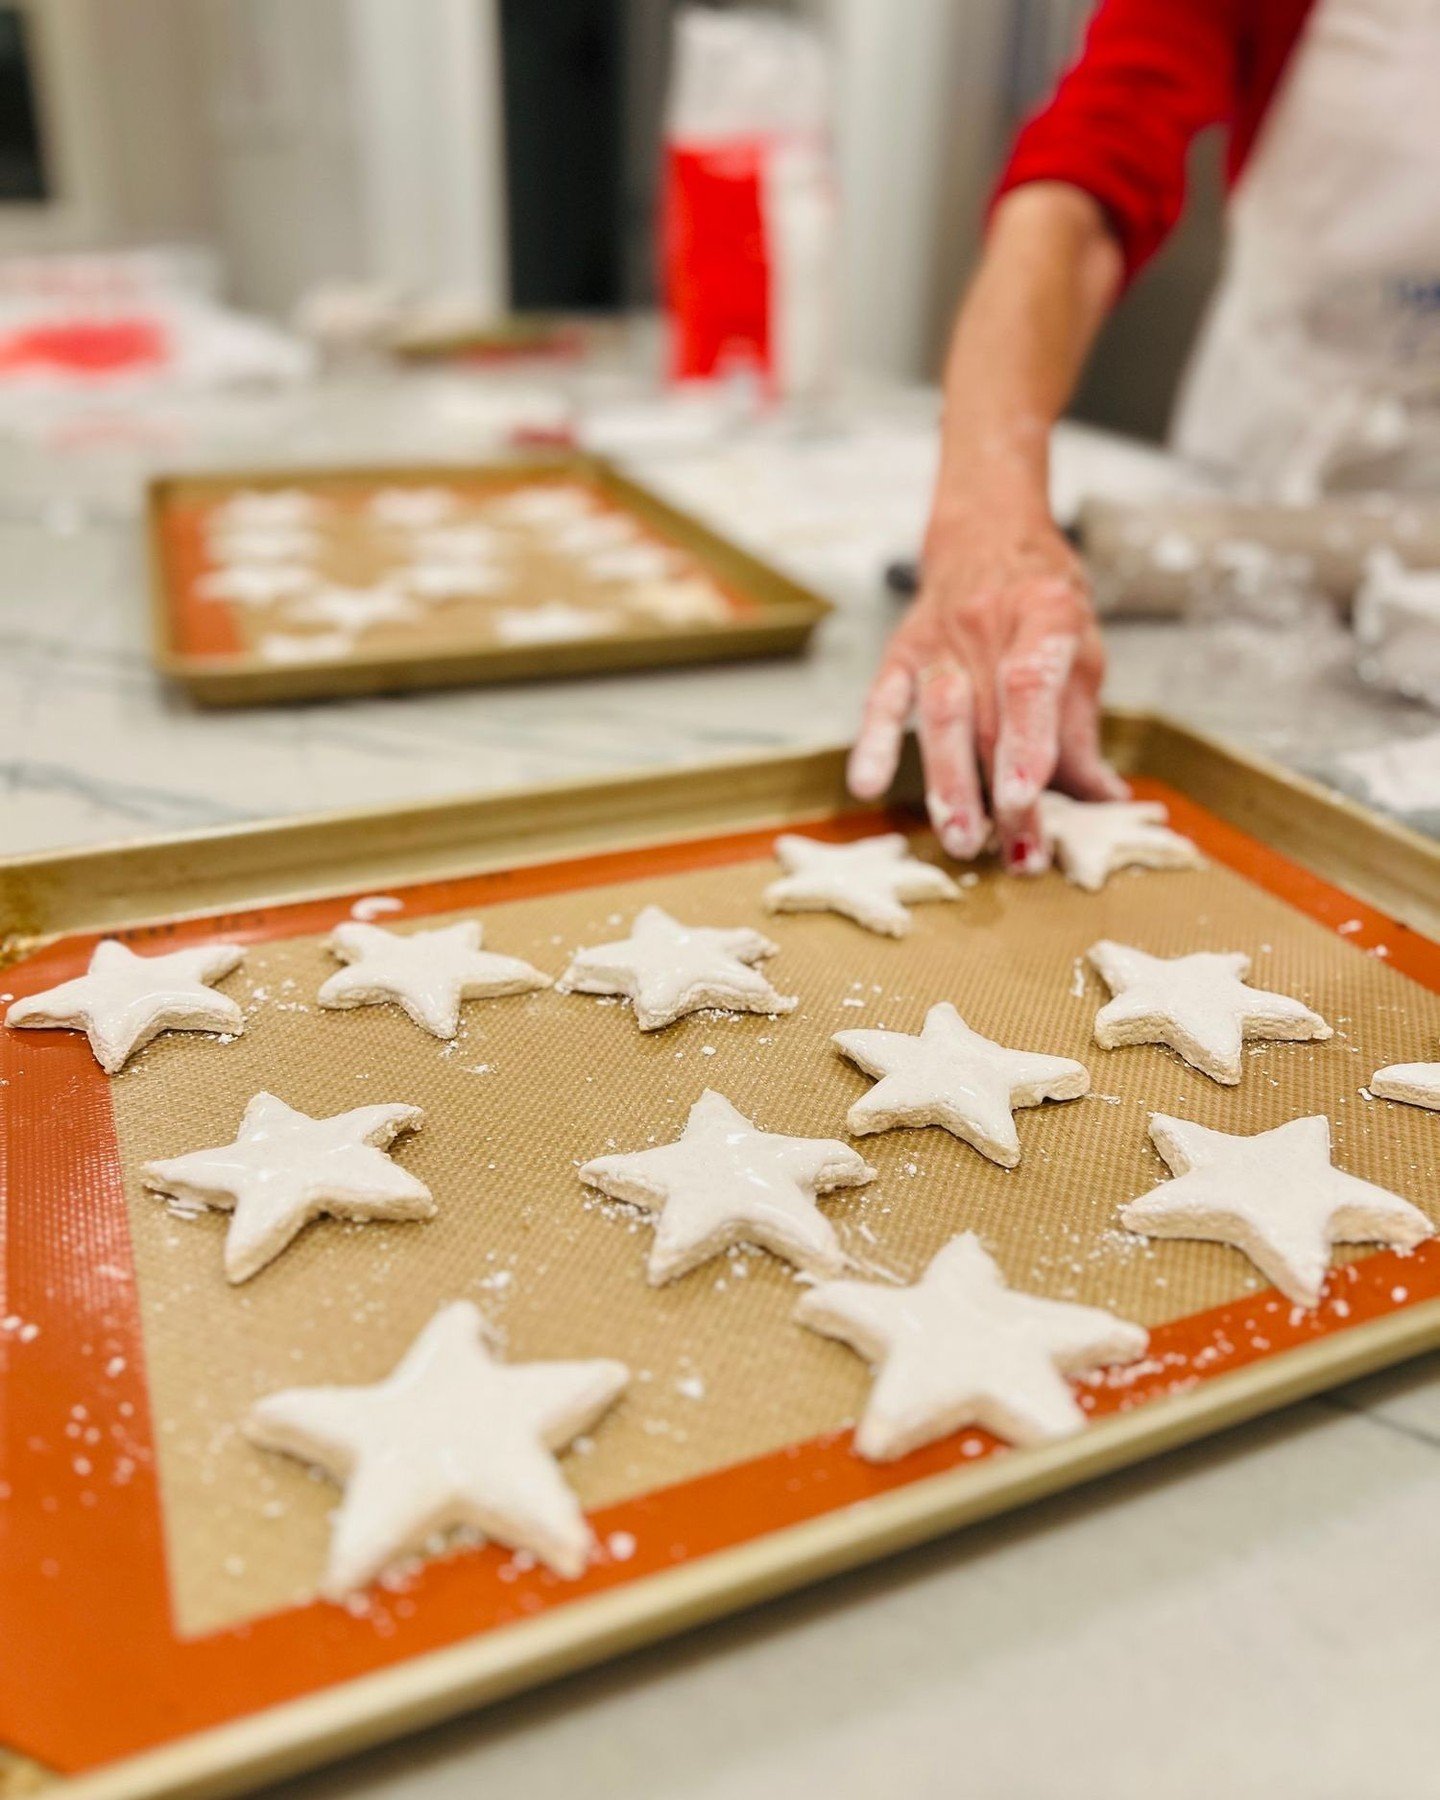 🍪✨ A Legacy Baked with Love: Cinnamon Stars Across Generations ✨🍪

In the heart of our family's kitchen, the sweet scent of cinnamon and love fills the air as we honor the beautiful legacy of Grandma Pauline - Cheryl&rsquo;s mother, Brittany&rsquo;